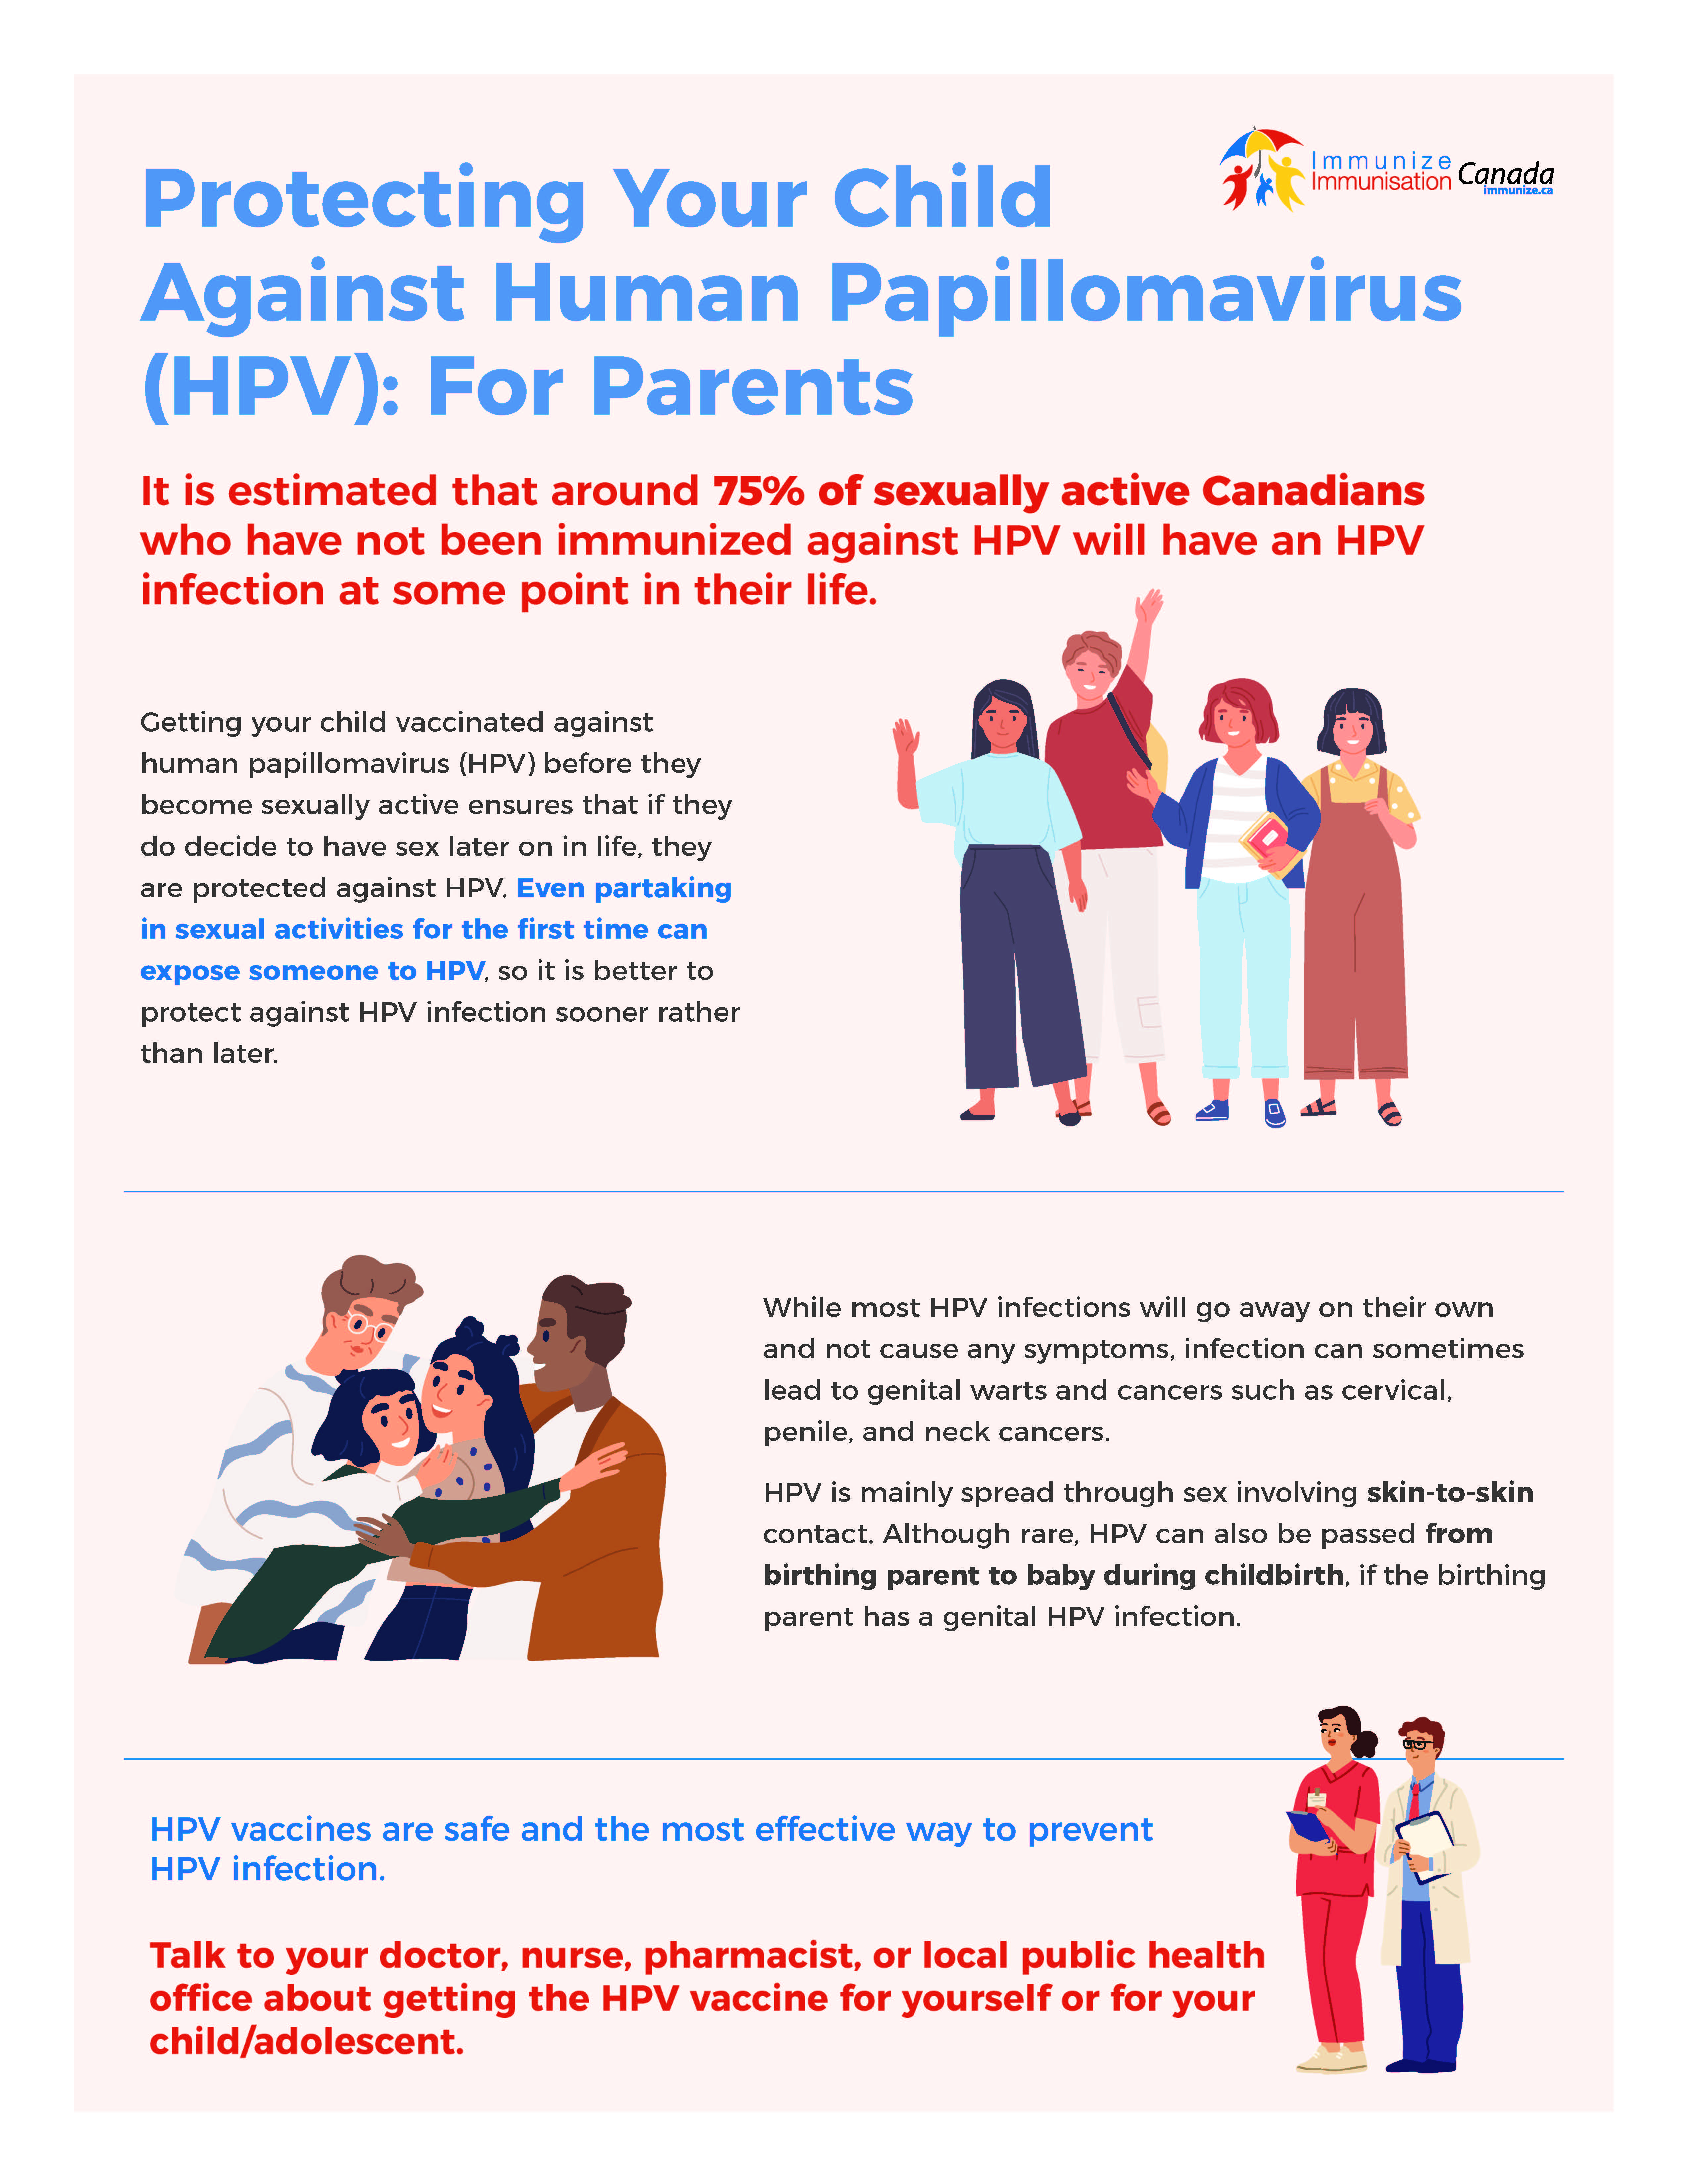 Protecting Your Child Against Human Papillomavirus (HPV): For Parents